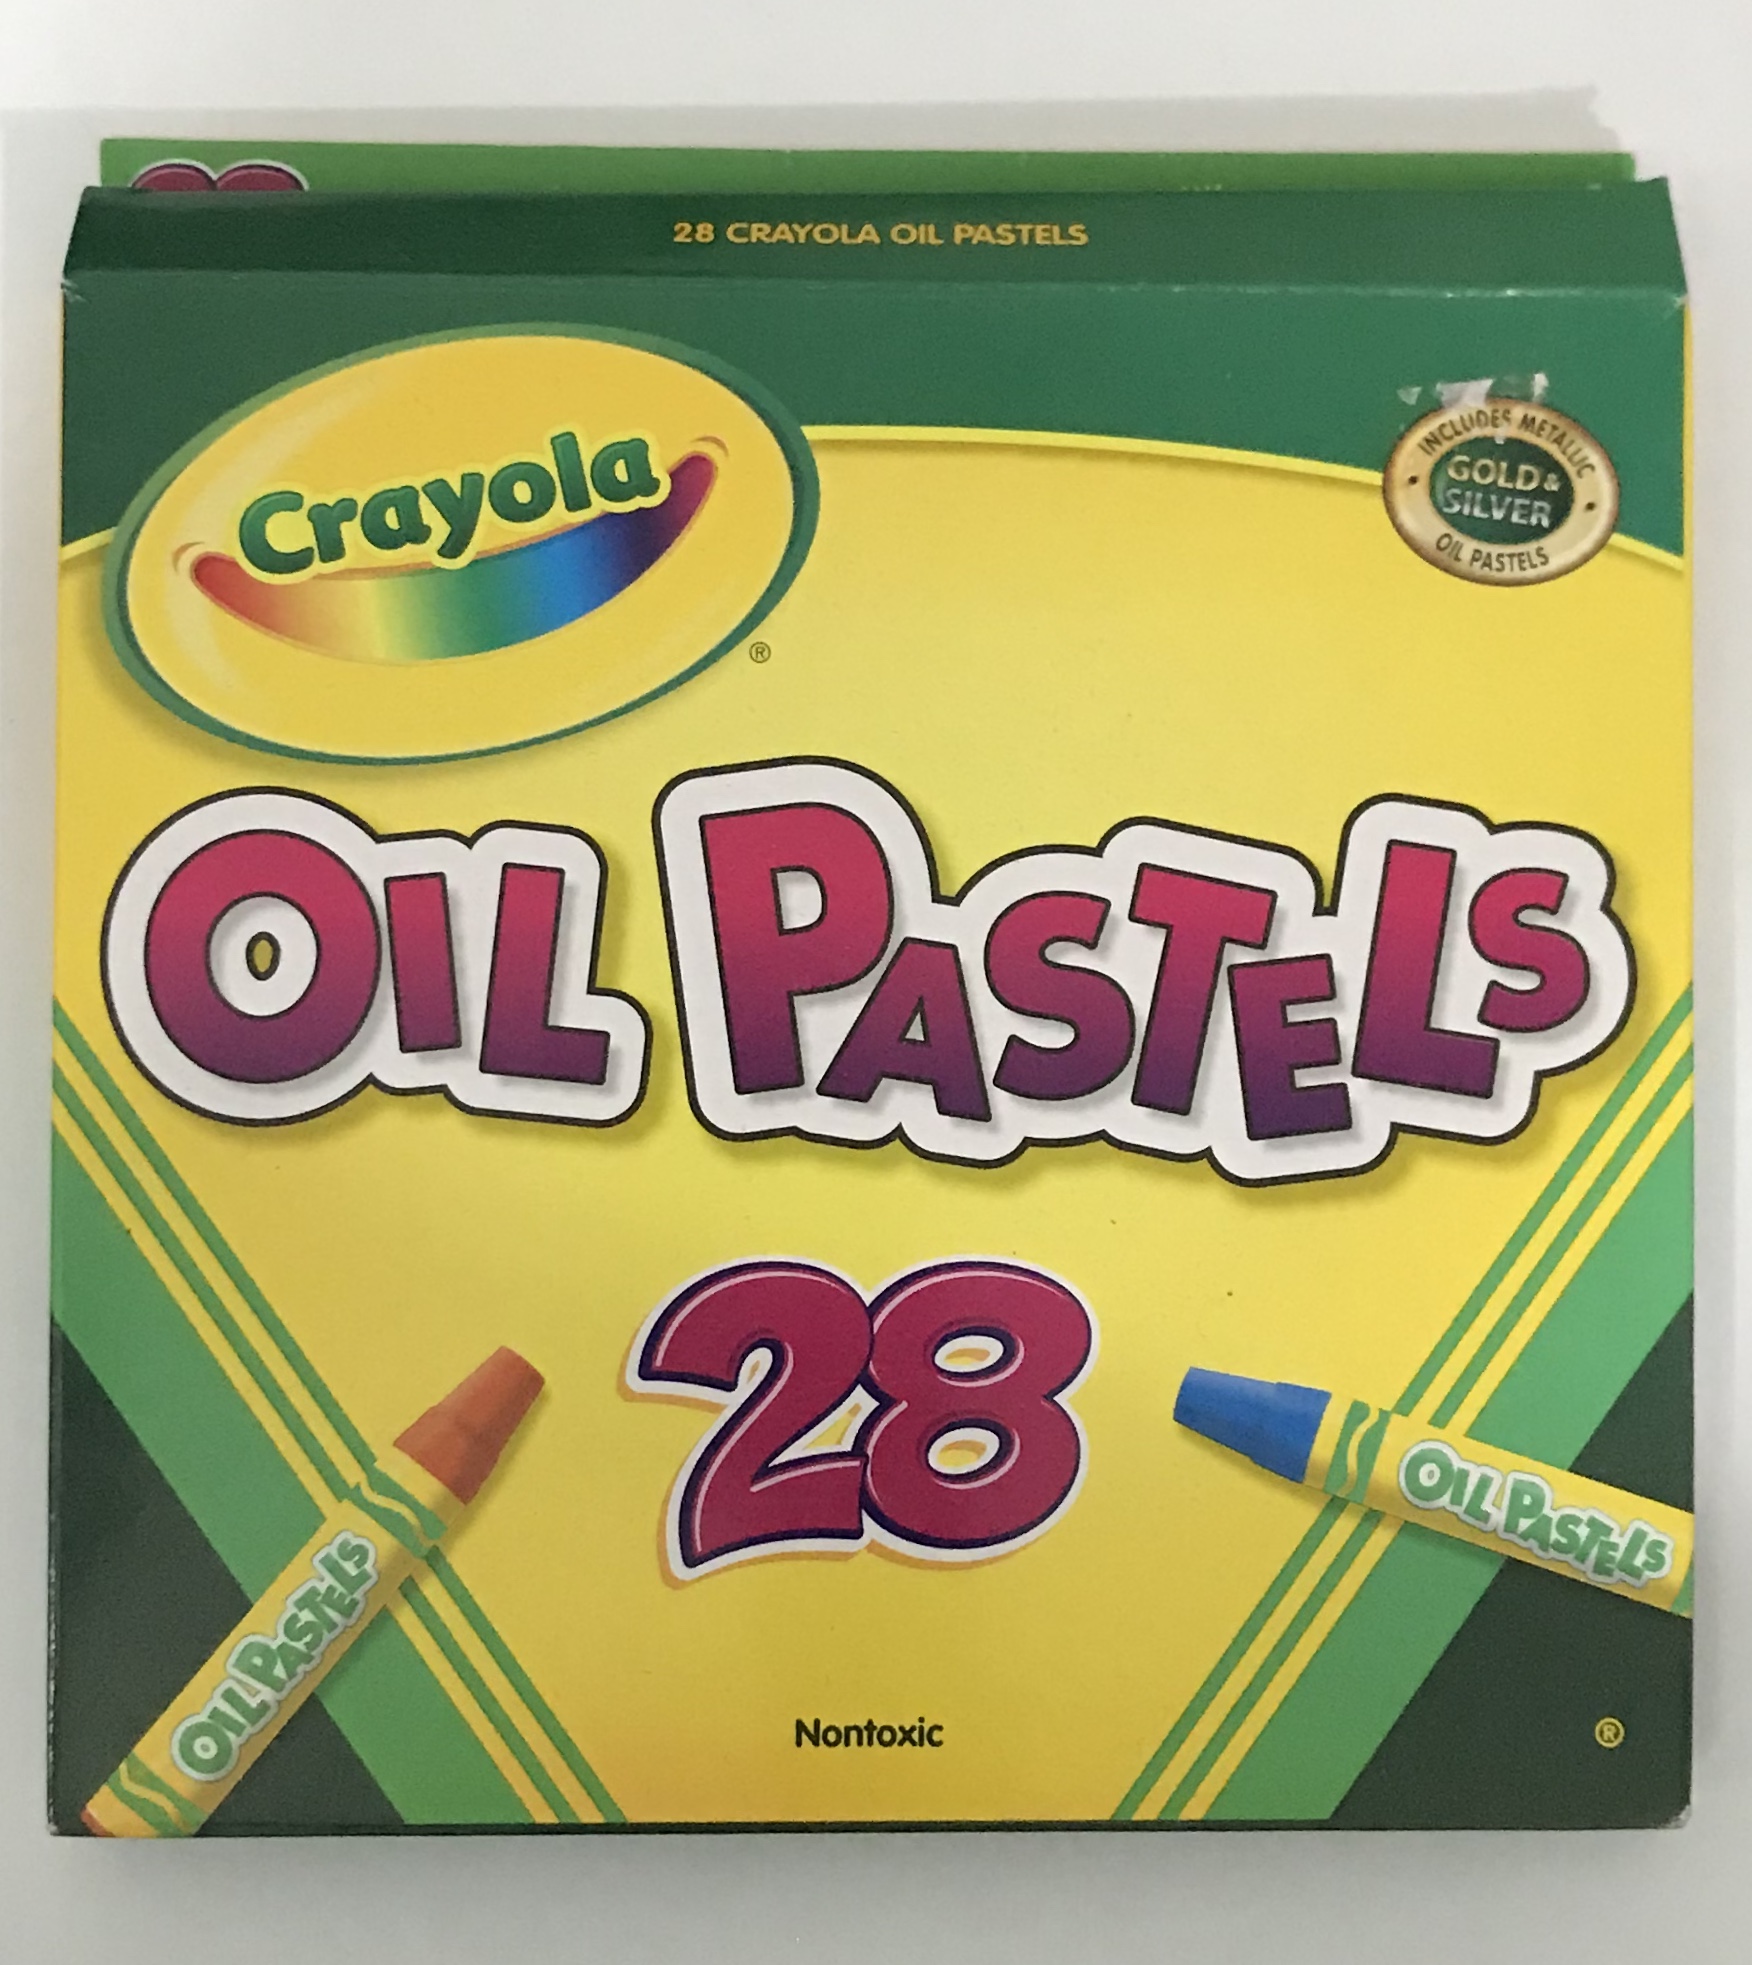 Crayola oil pastels (28 pack) – BookBerries Limited